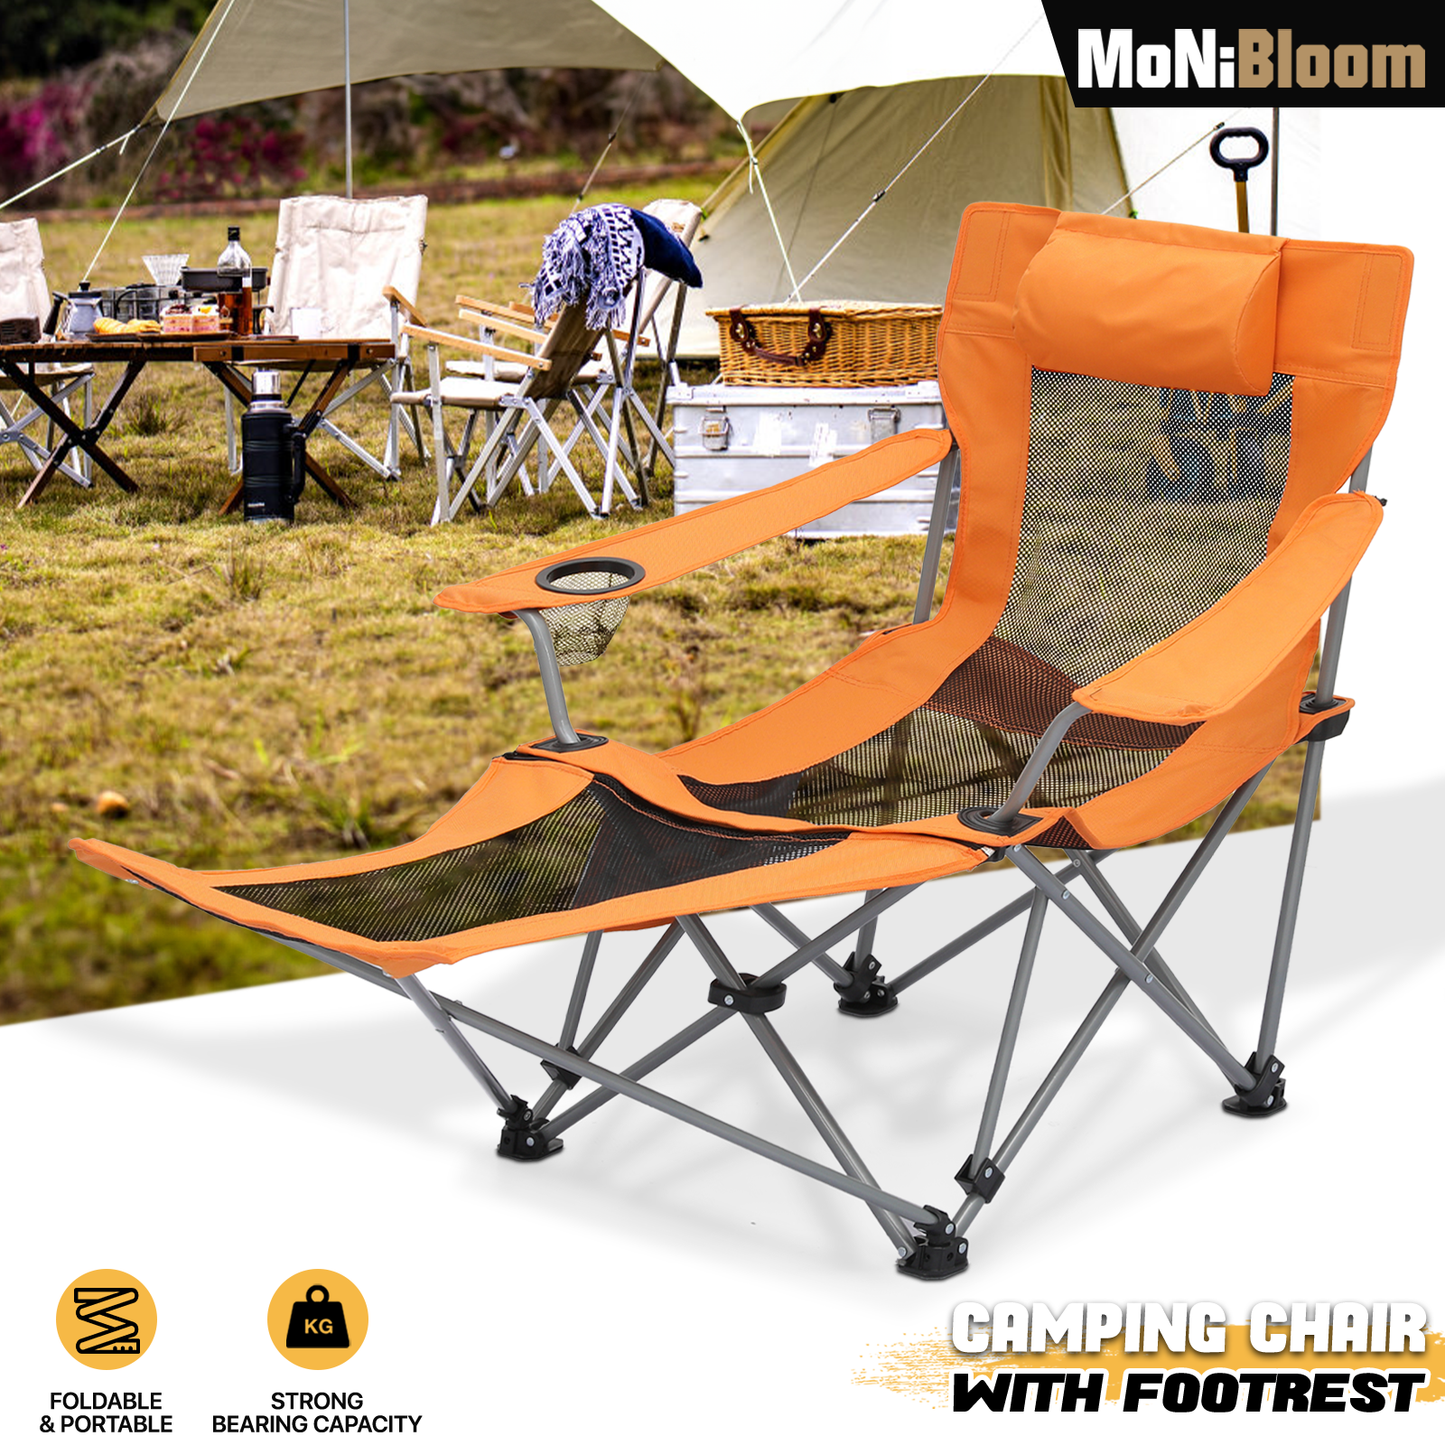 Outdoor Camping Chairs - Steel Tube - Oxford Fabric